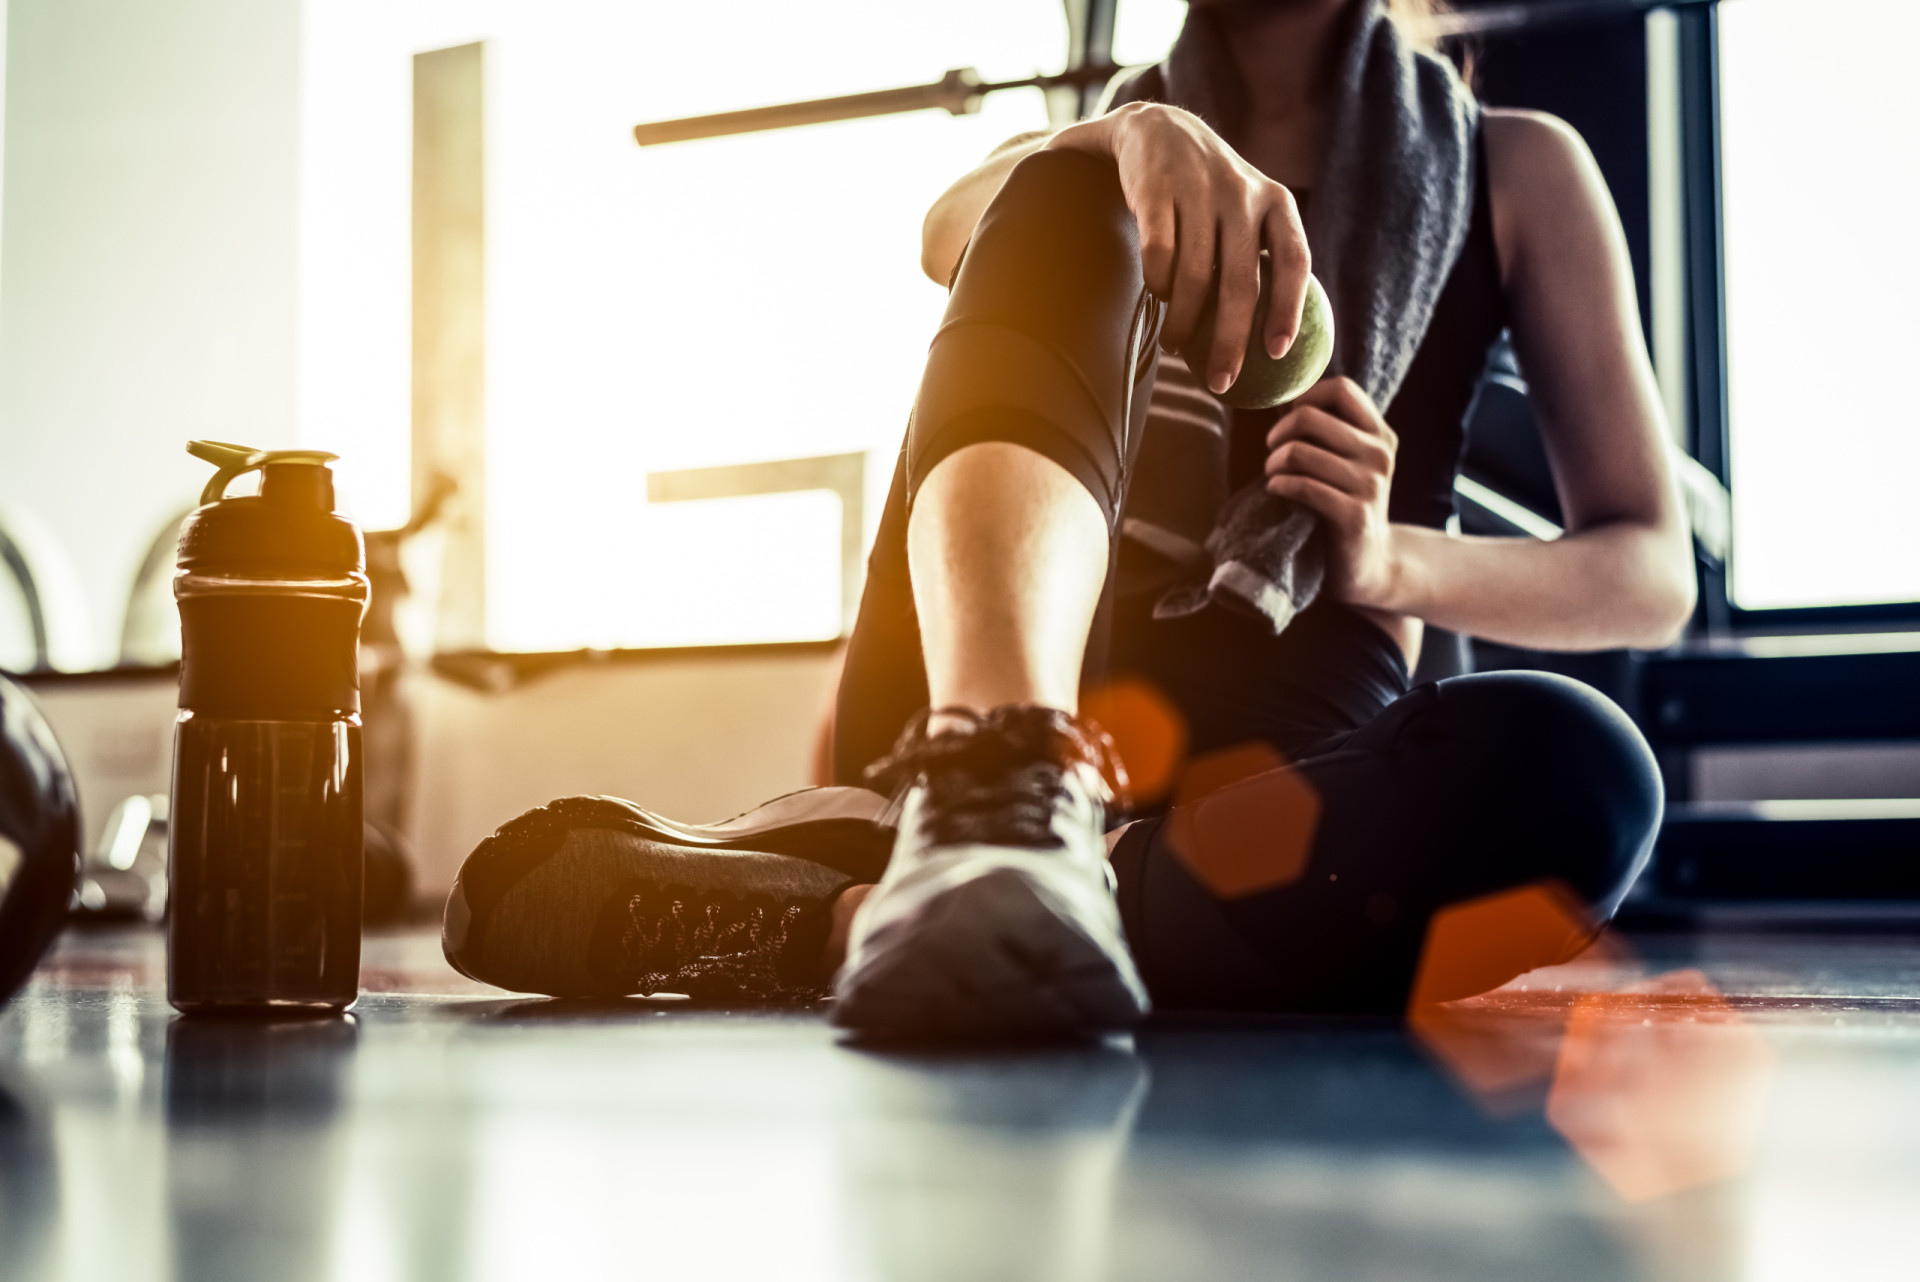 <p>Many times when we hear about the benefits of physical activity, it's in reference to our levels of overall fitness.</p><p><a href="https://www.msn.com/en-in/community/channel/vid-7xx8mnucu55yw63we9va2gwr7uihbxwc68fxqp25x6tg4ftibpra?cvid=94631541bc0f4f89bfd59158d696ad7e">Follow us and access great exclusive content every day</a></p>